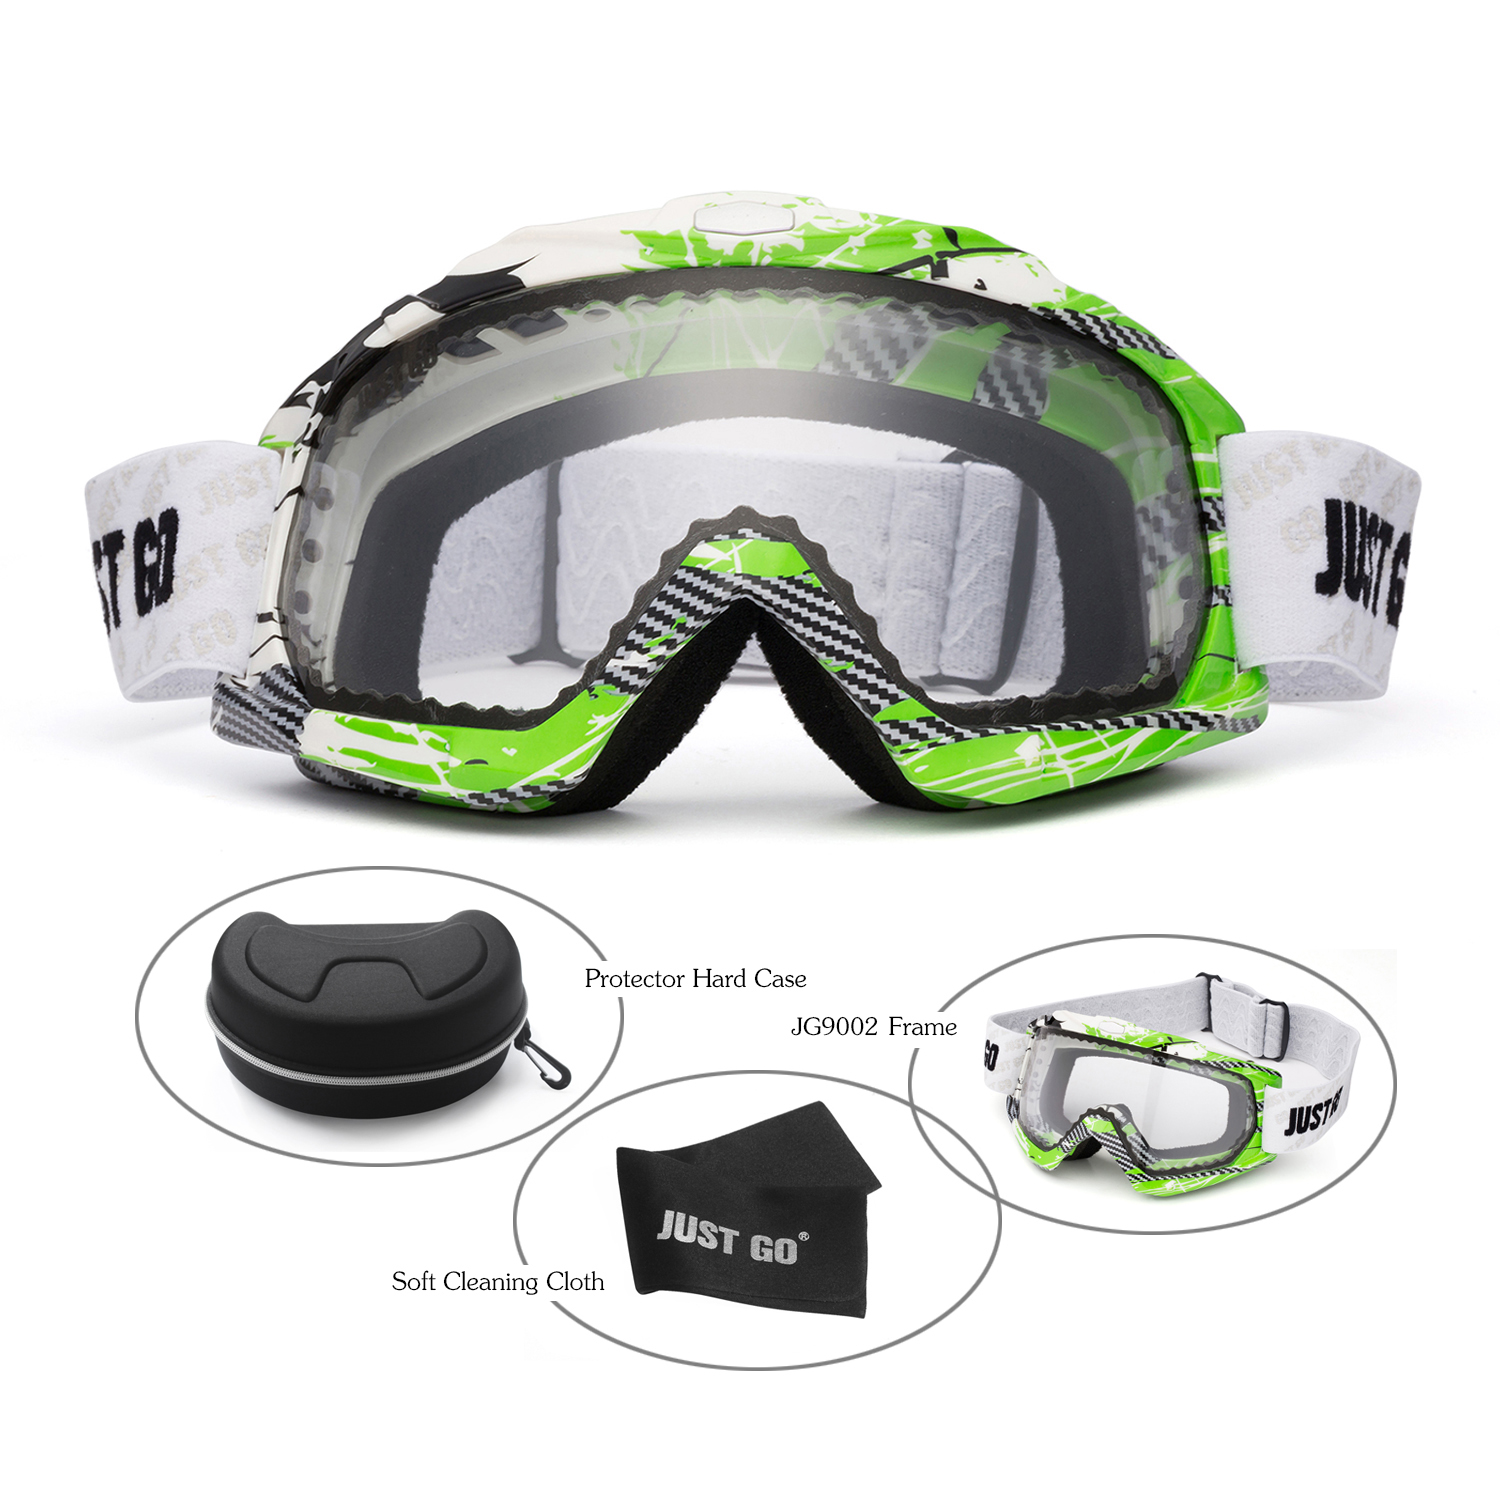 JUST GO Ski Goggles for Skiing Motorcycling and Winter Sports Dual-Layer Anti-Fog 100% UV Protection lens Snowboard Goggles fit Men, Women and Youth, Green and White Frame/ Clear Lens (VLT 81.2%) - image 2 of 9